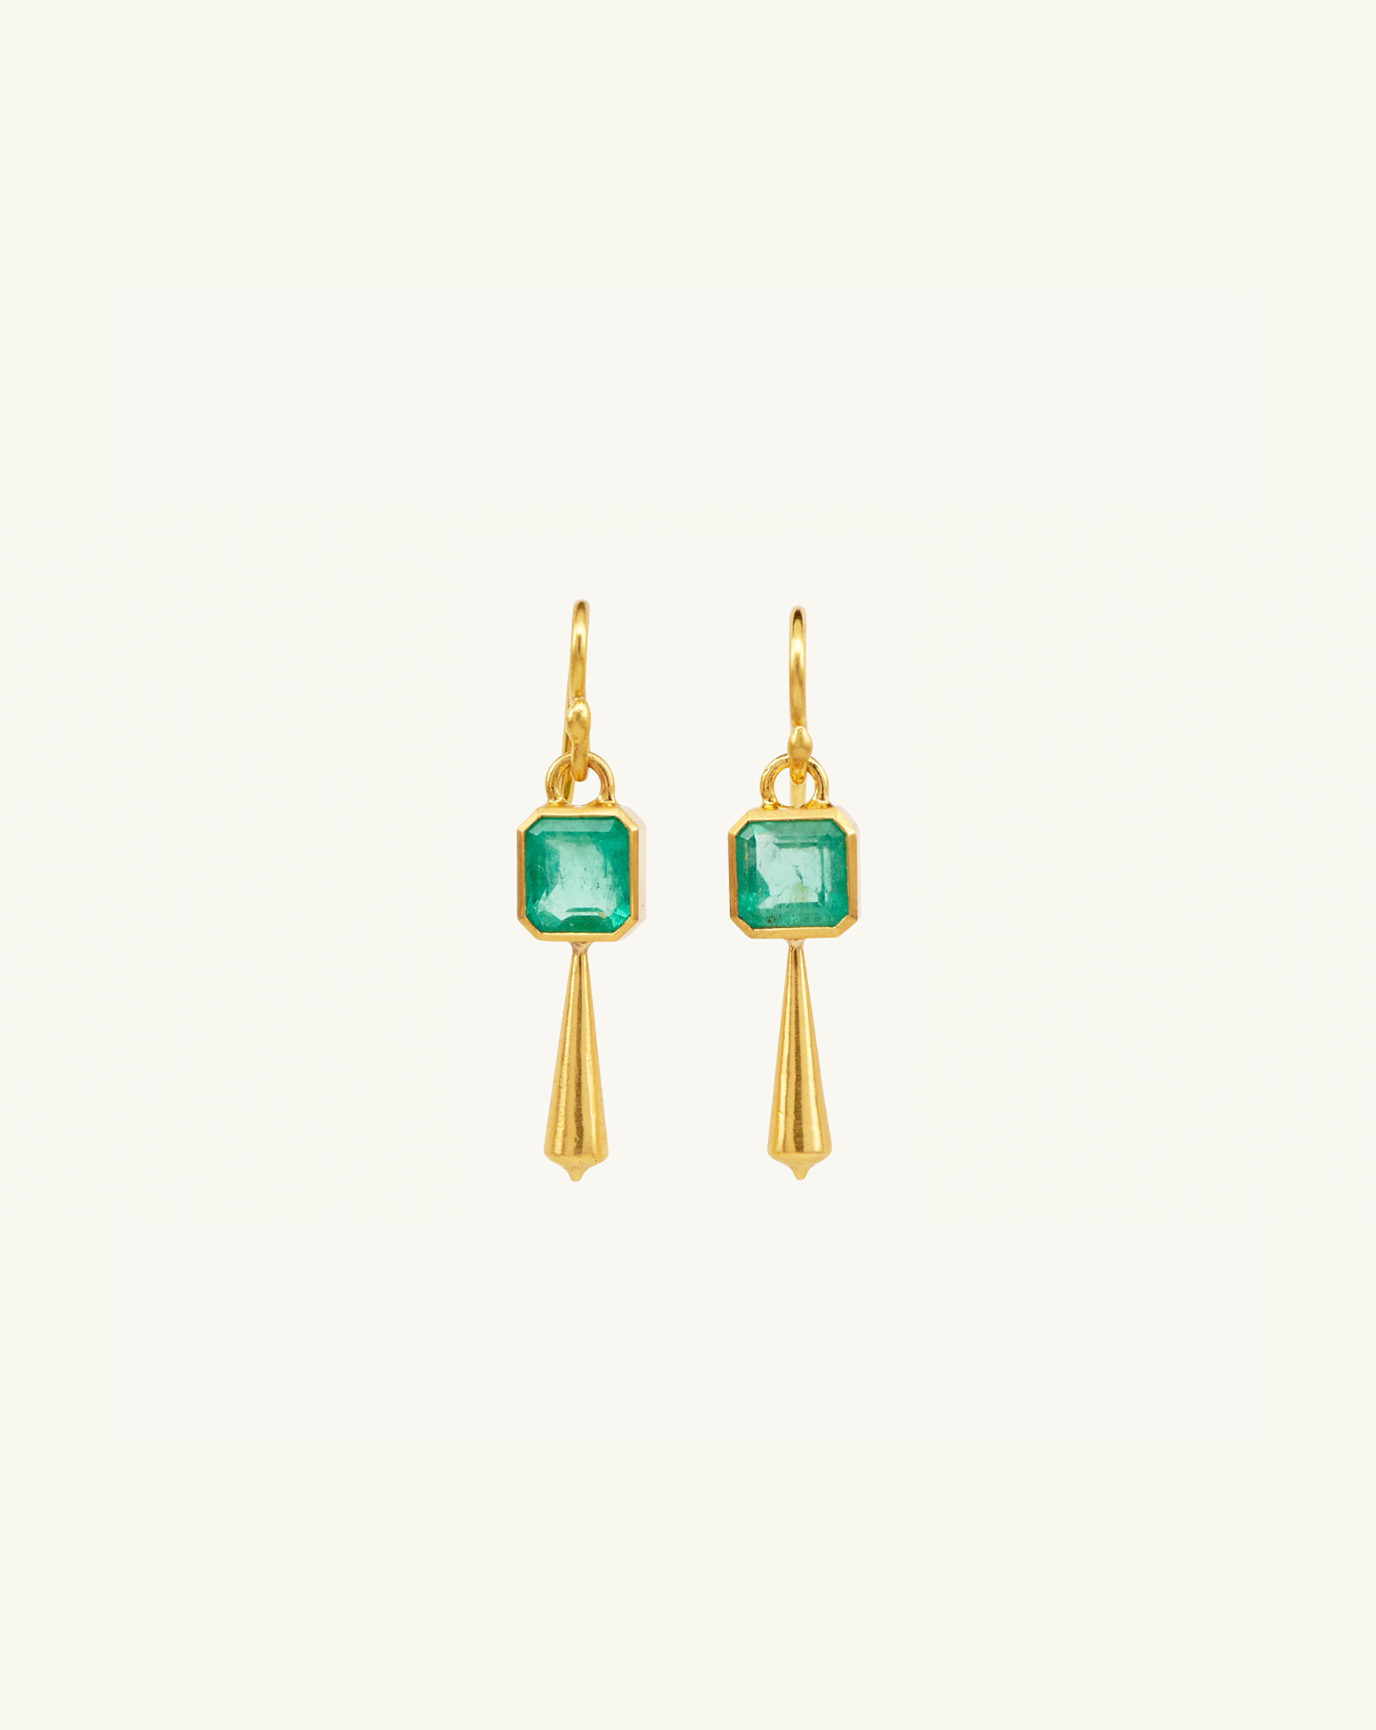 Product image of the tapered drop earrings with two large square emerald gemstones